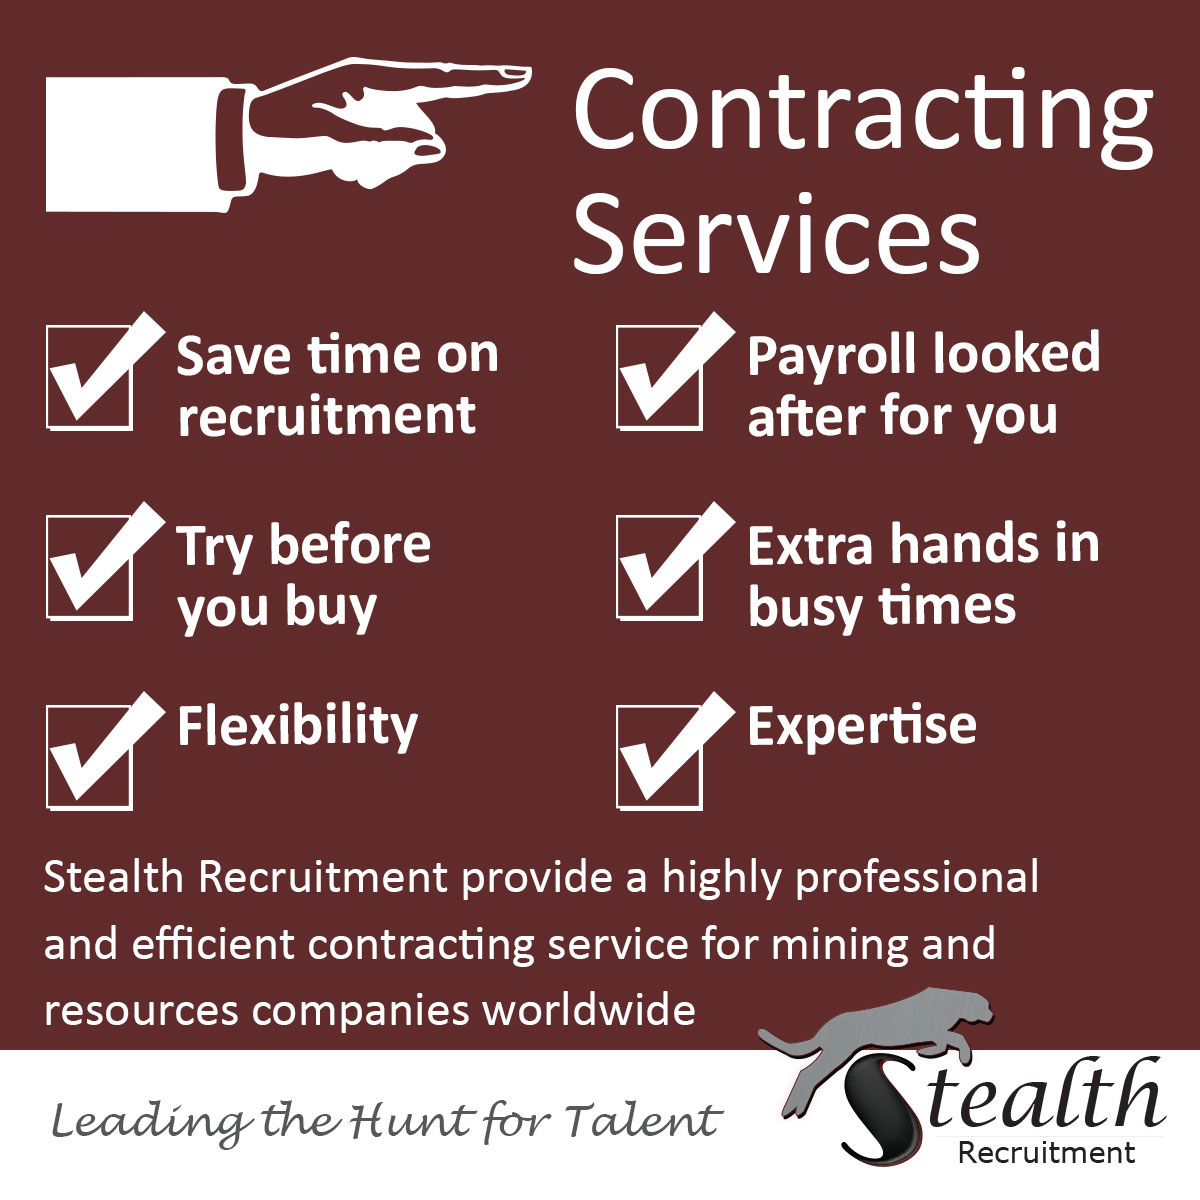 Contracting and Payroll Services